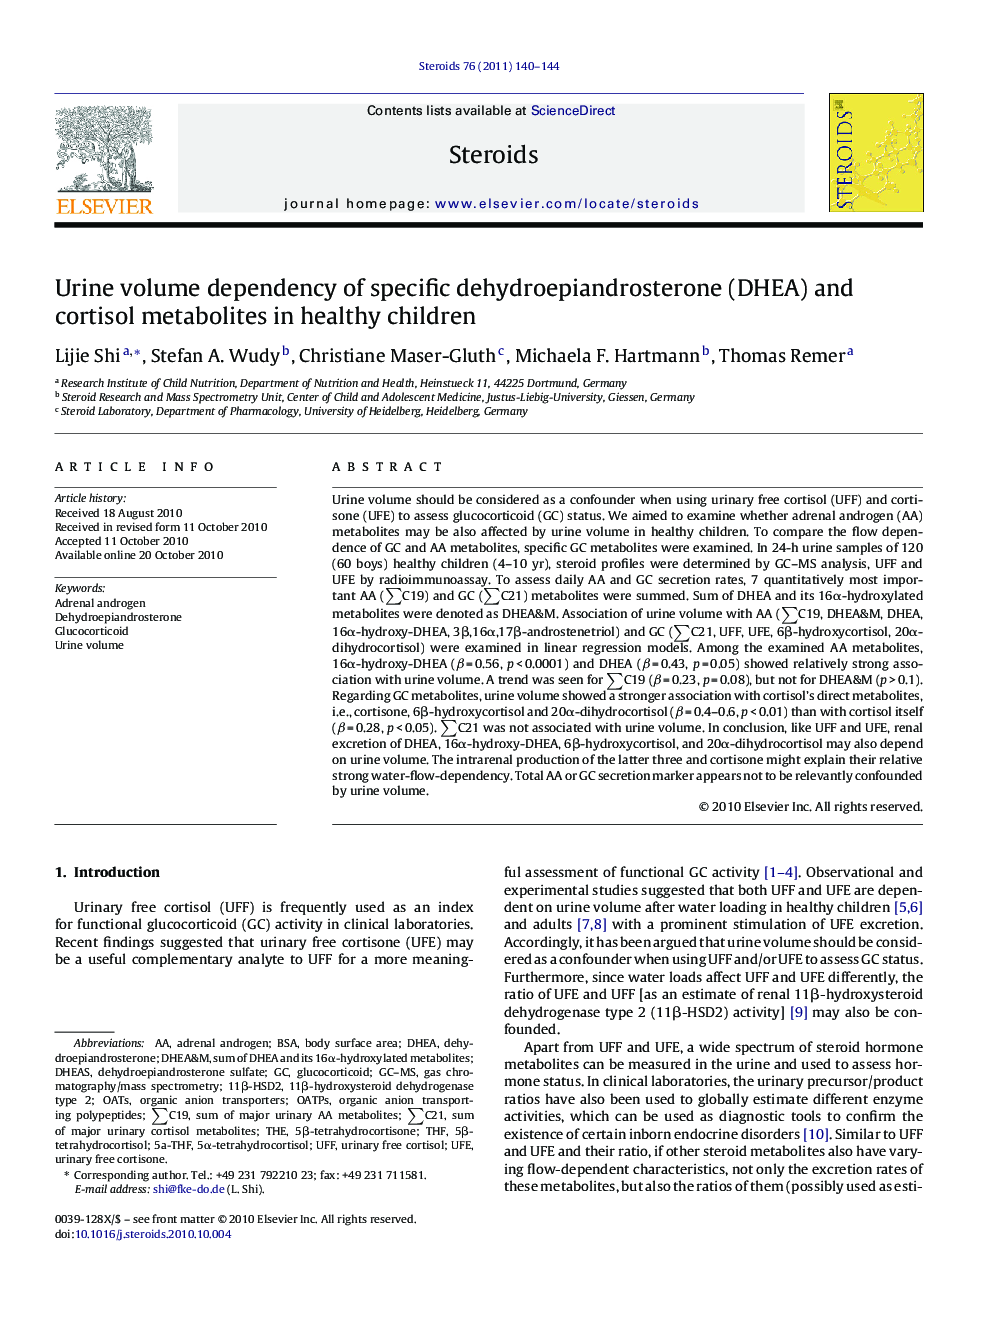 Urine volume dependency of specific dehydroepiandrosterone (DHEA) and cortisol metabolites in healthy children